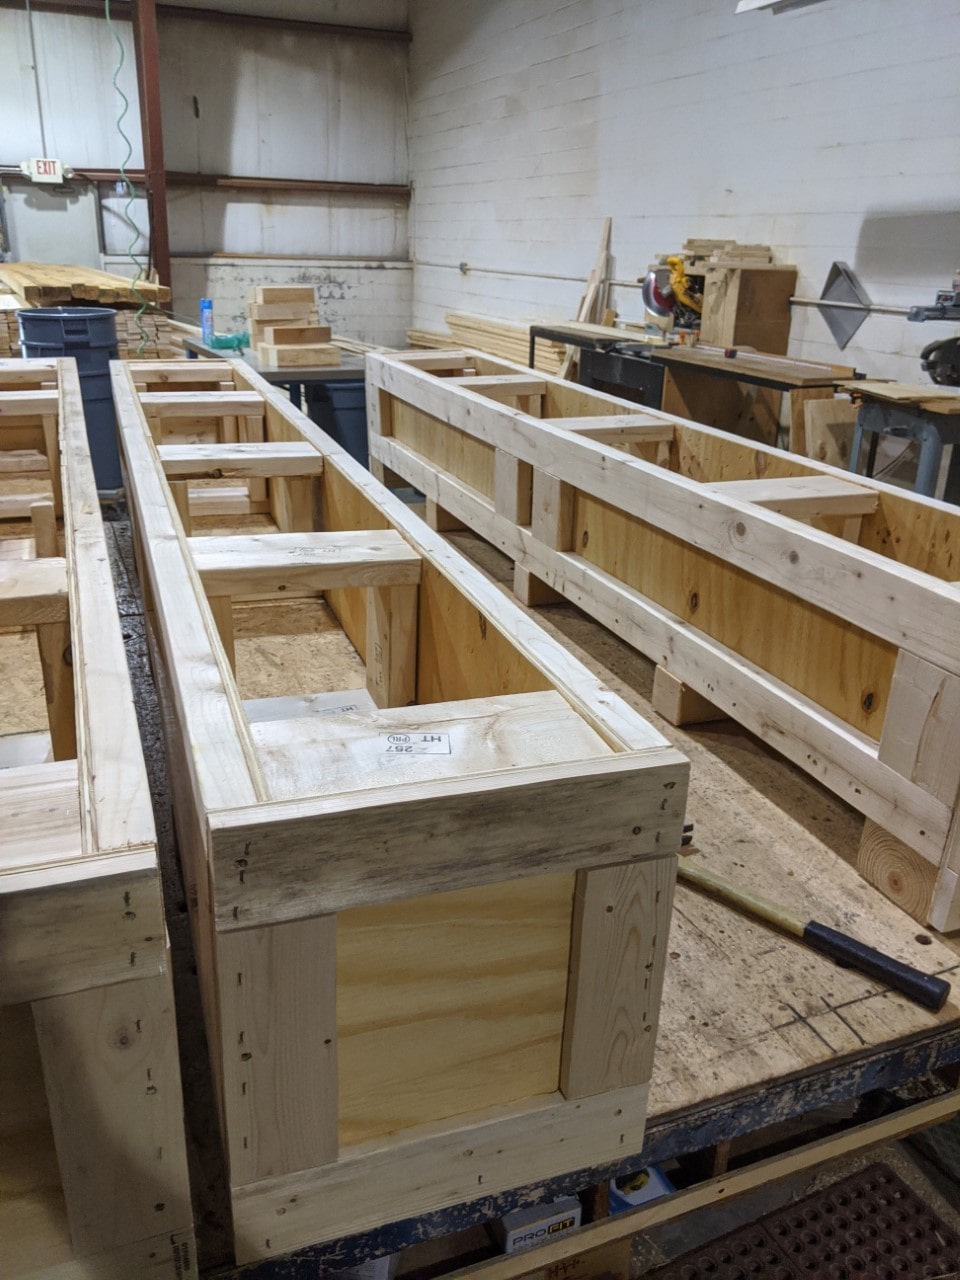 Wooden Crates Inside The Stablishment